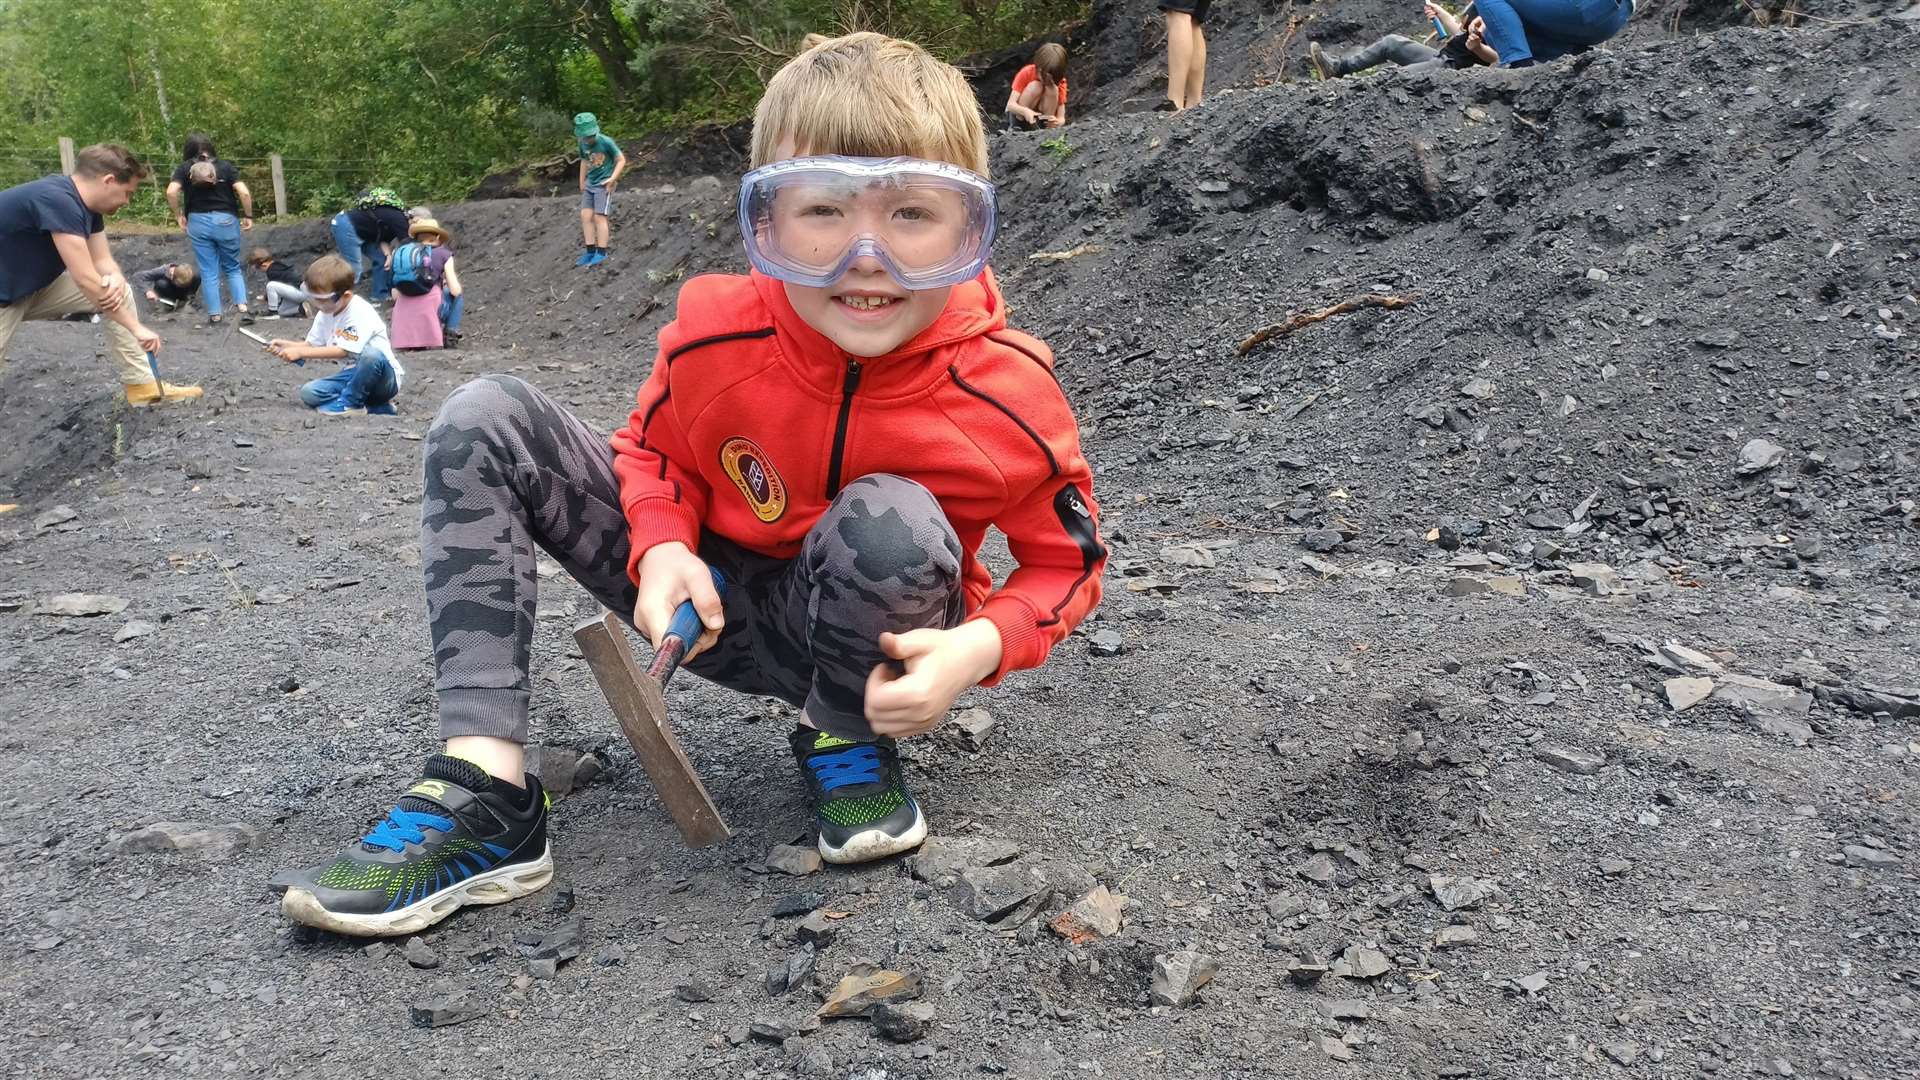 My son loved hunting for fossils